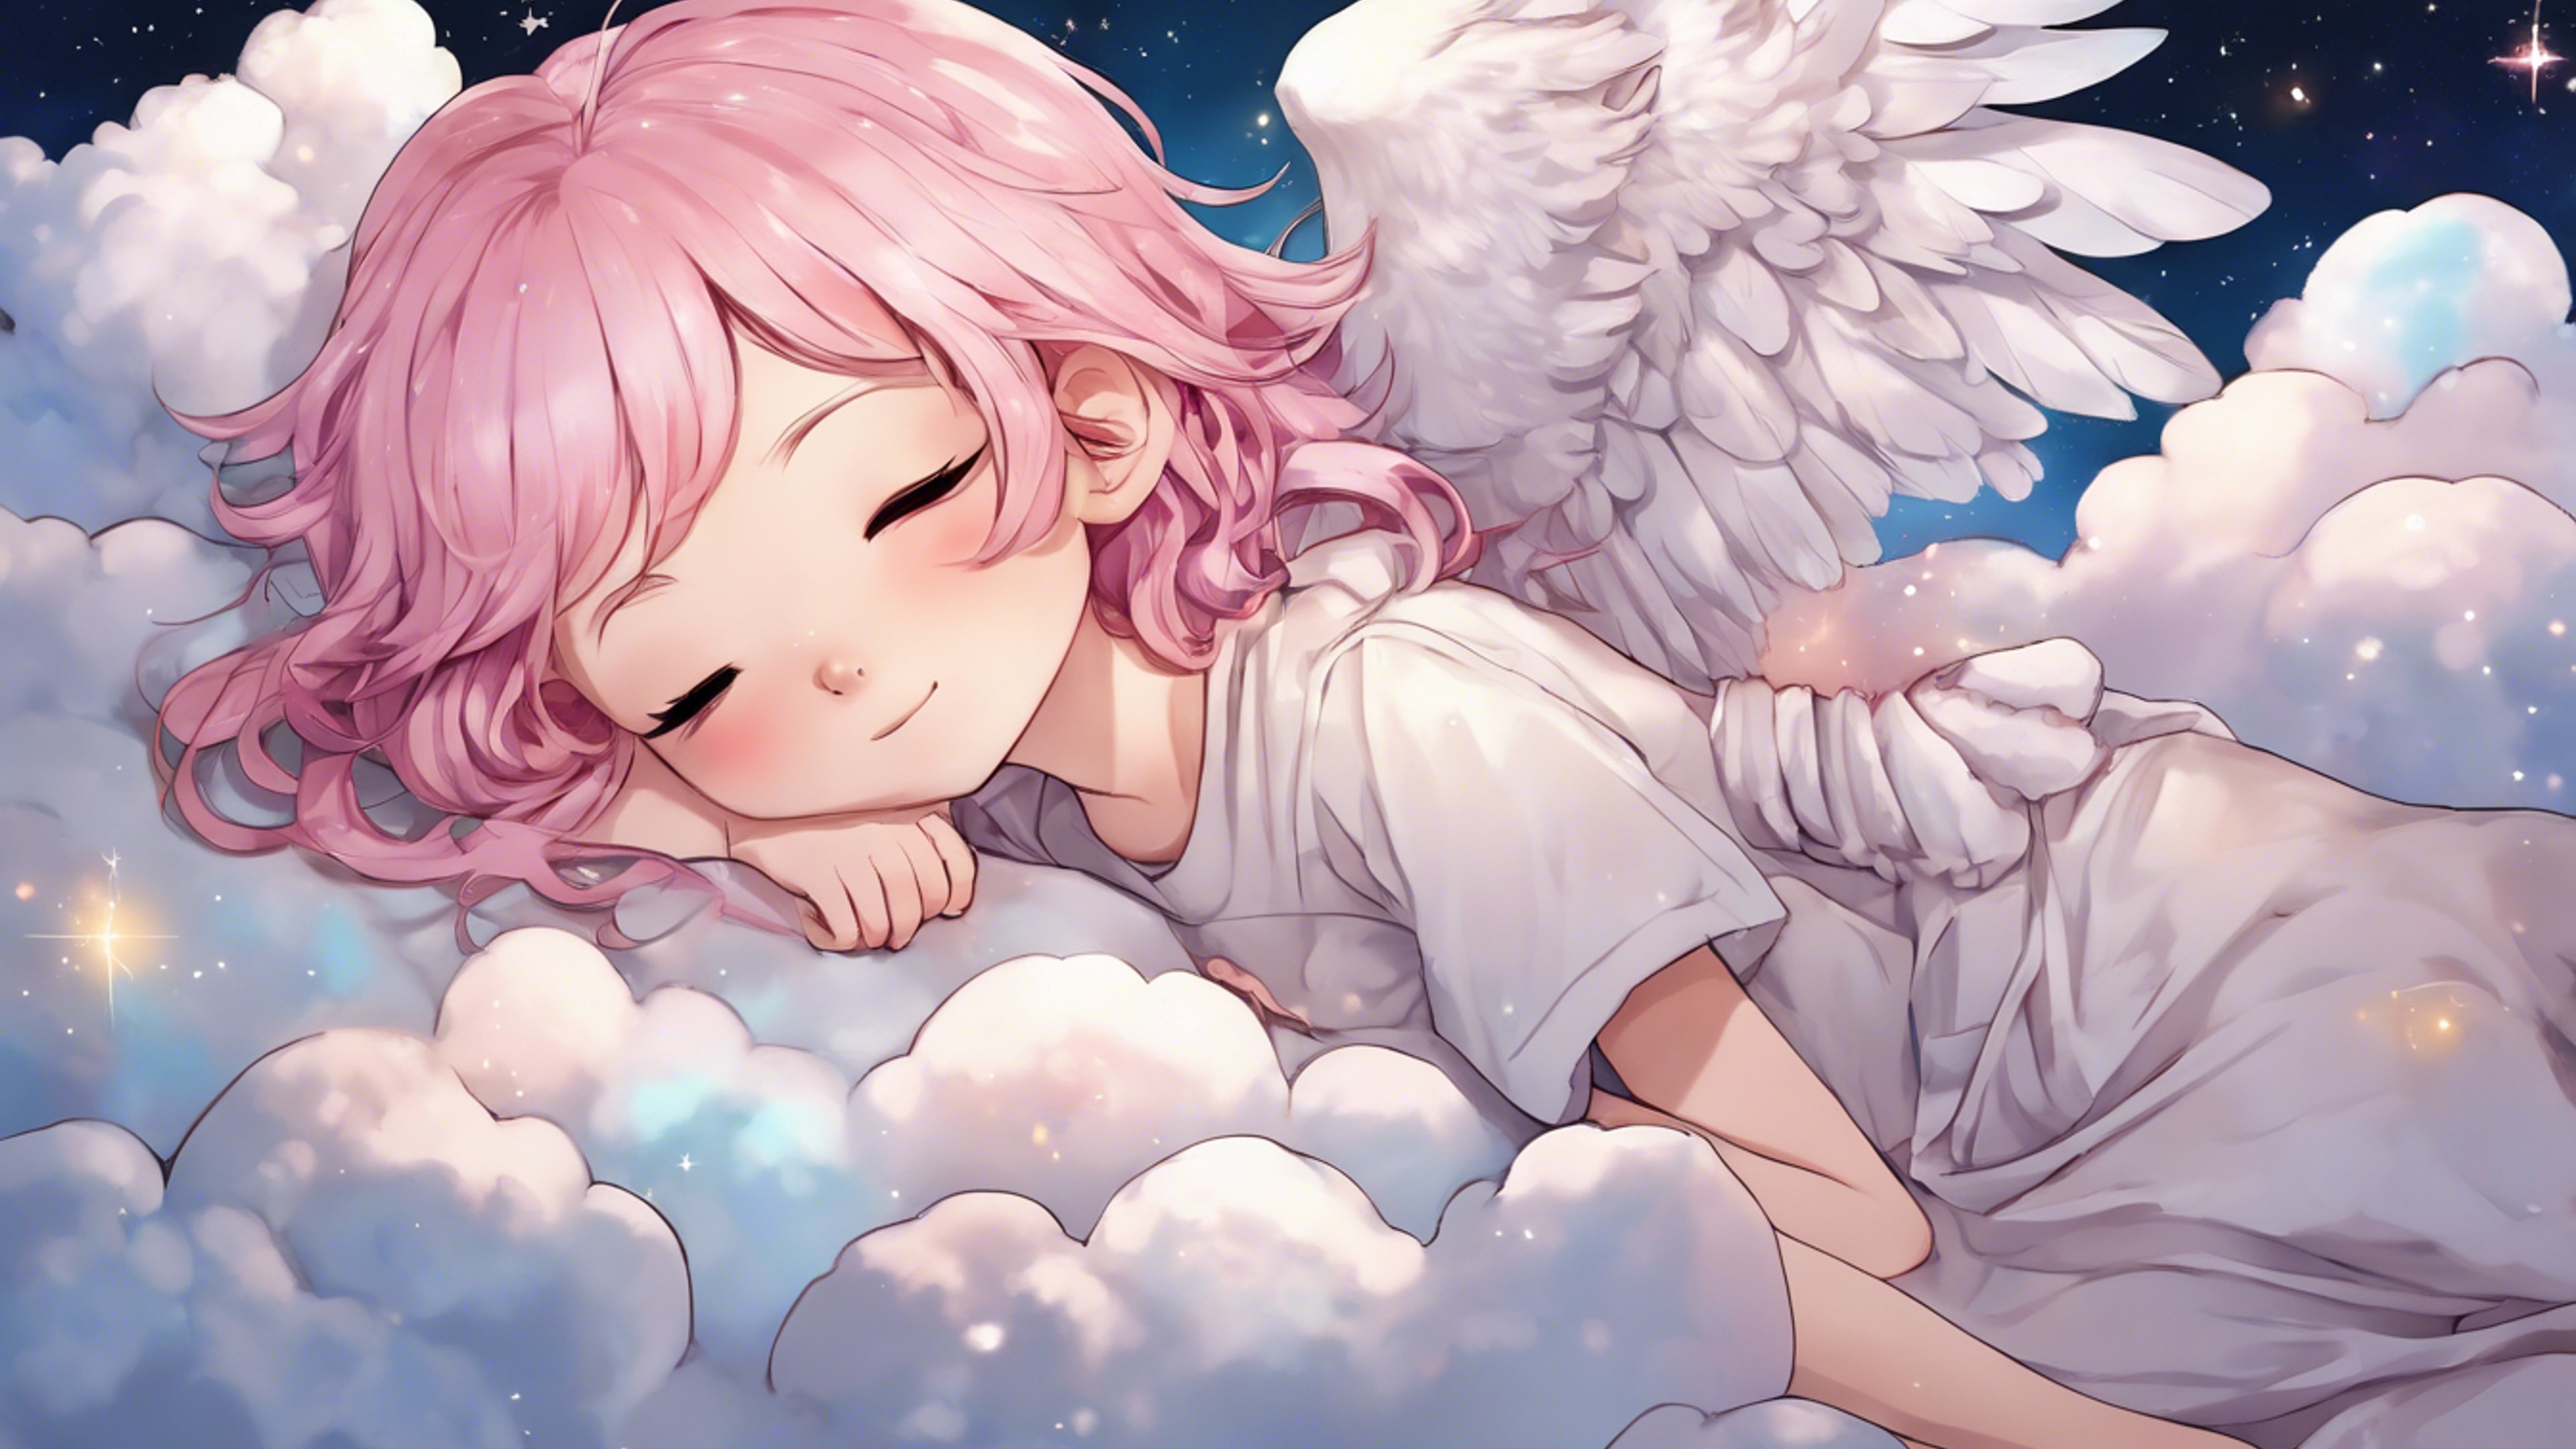 A chibi-style anime girl with pastel pink hair and angel wings, sleeping peacefully on a fluffy cloud under a starry night sky. 牆紙[4a6f35b80bd74bd2872d]